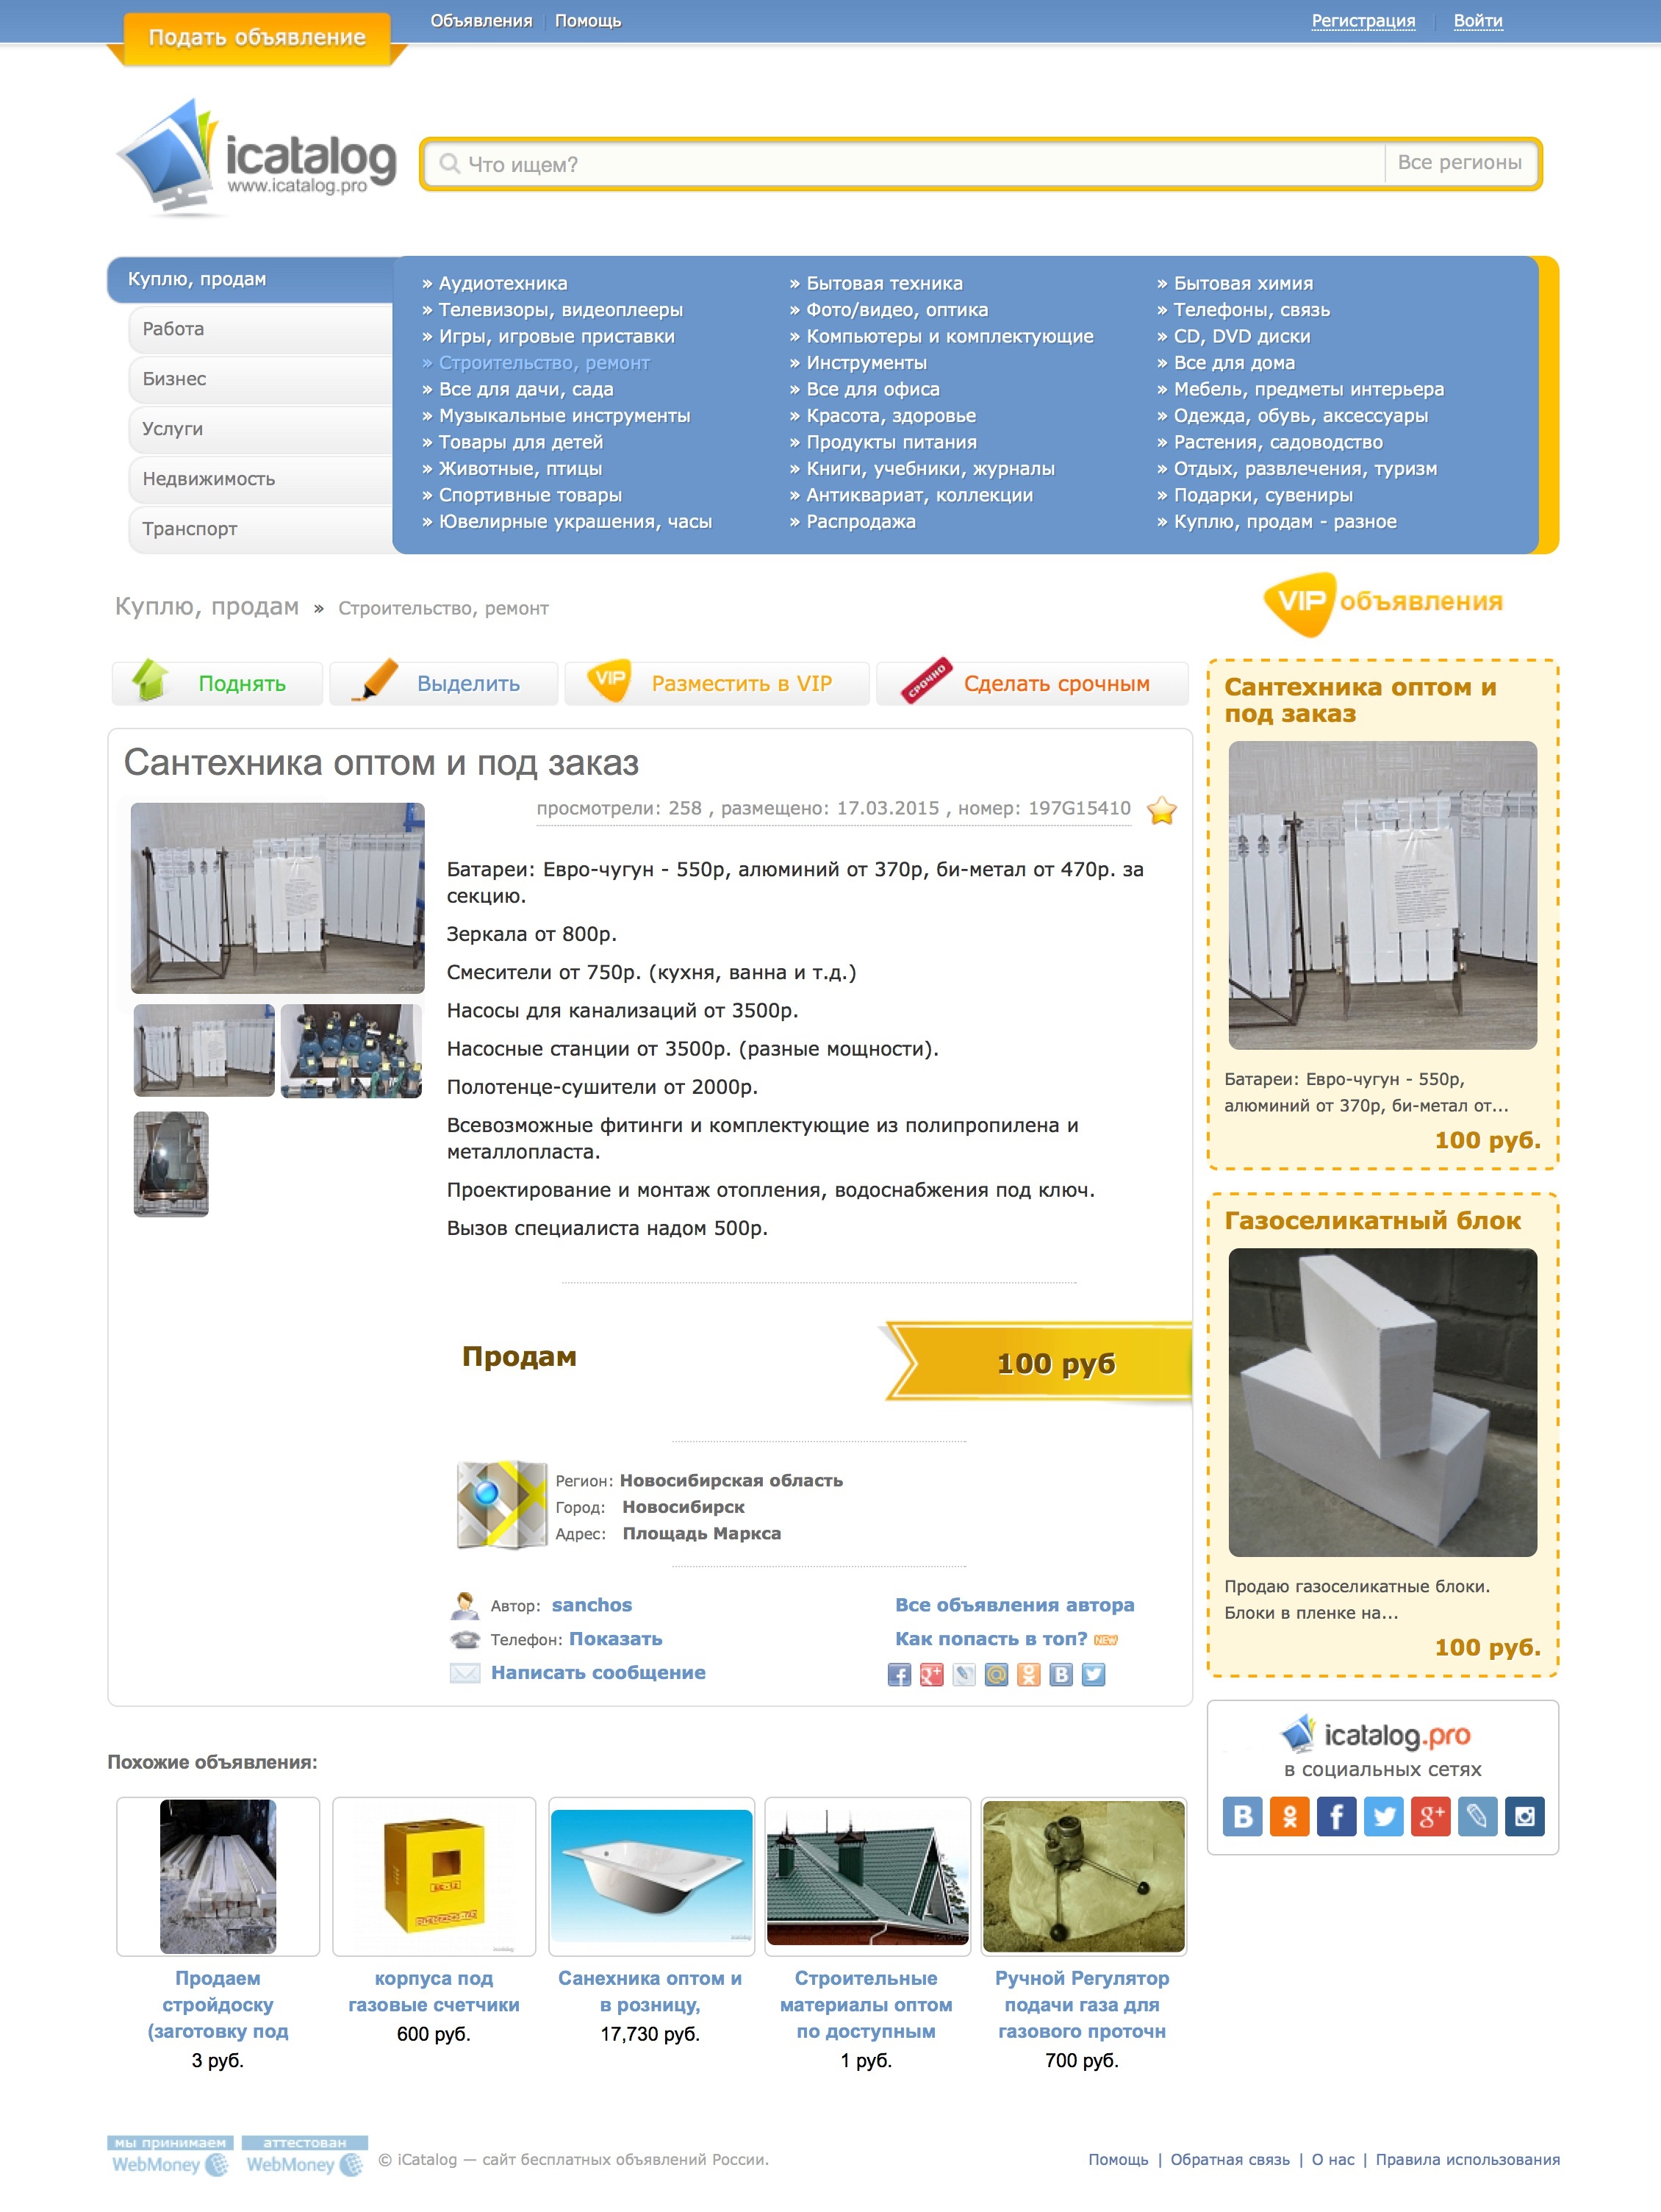 iCatalog - Ads board №3- Object view page